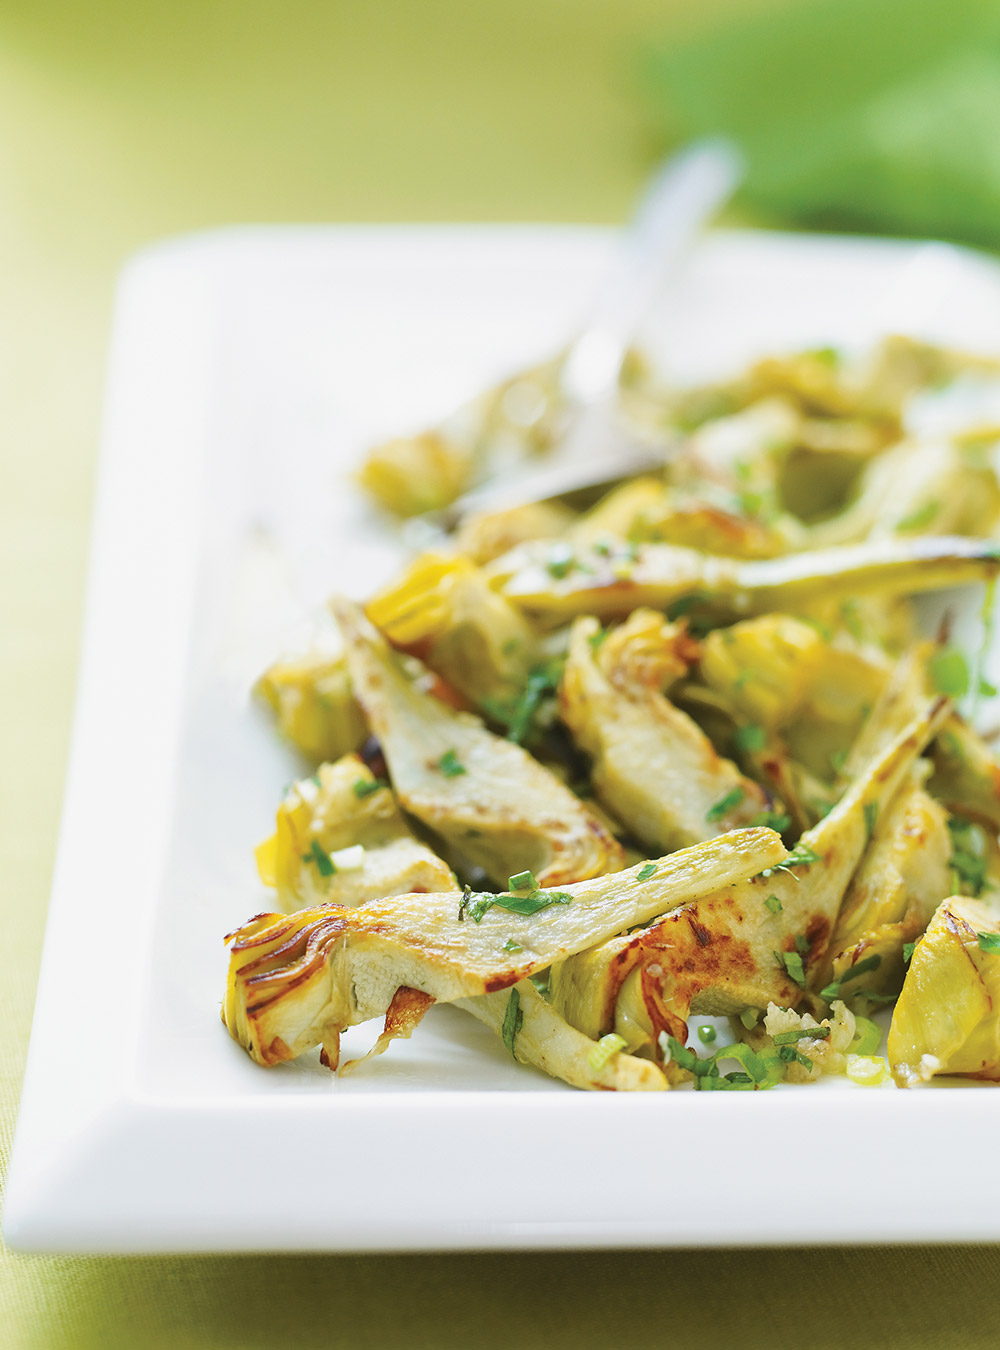 Pan-Roasted Artichokes with Herbs